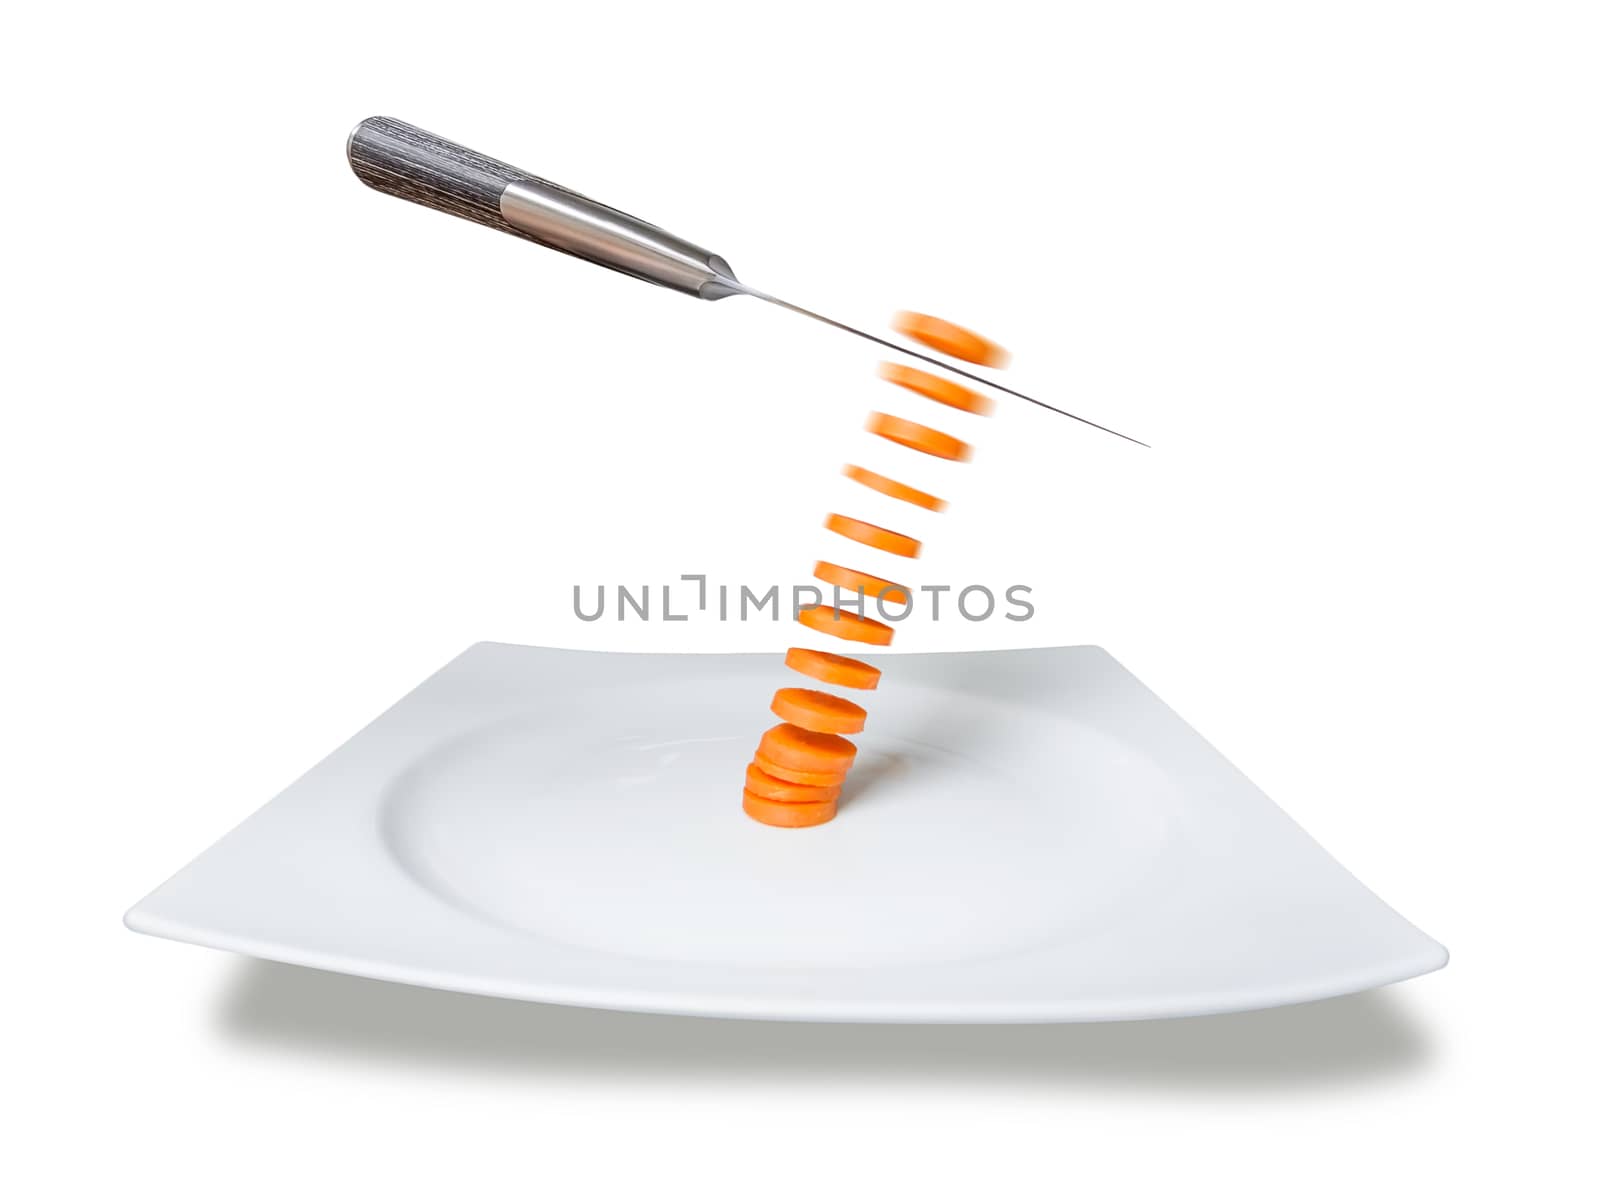 Knife slicing carrot in the air over plate by doble.d